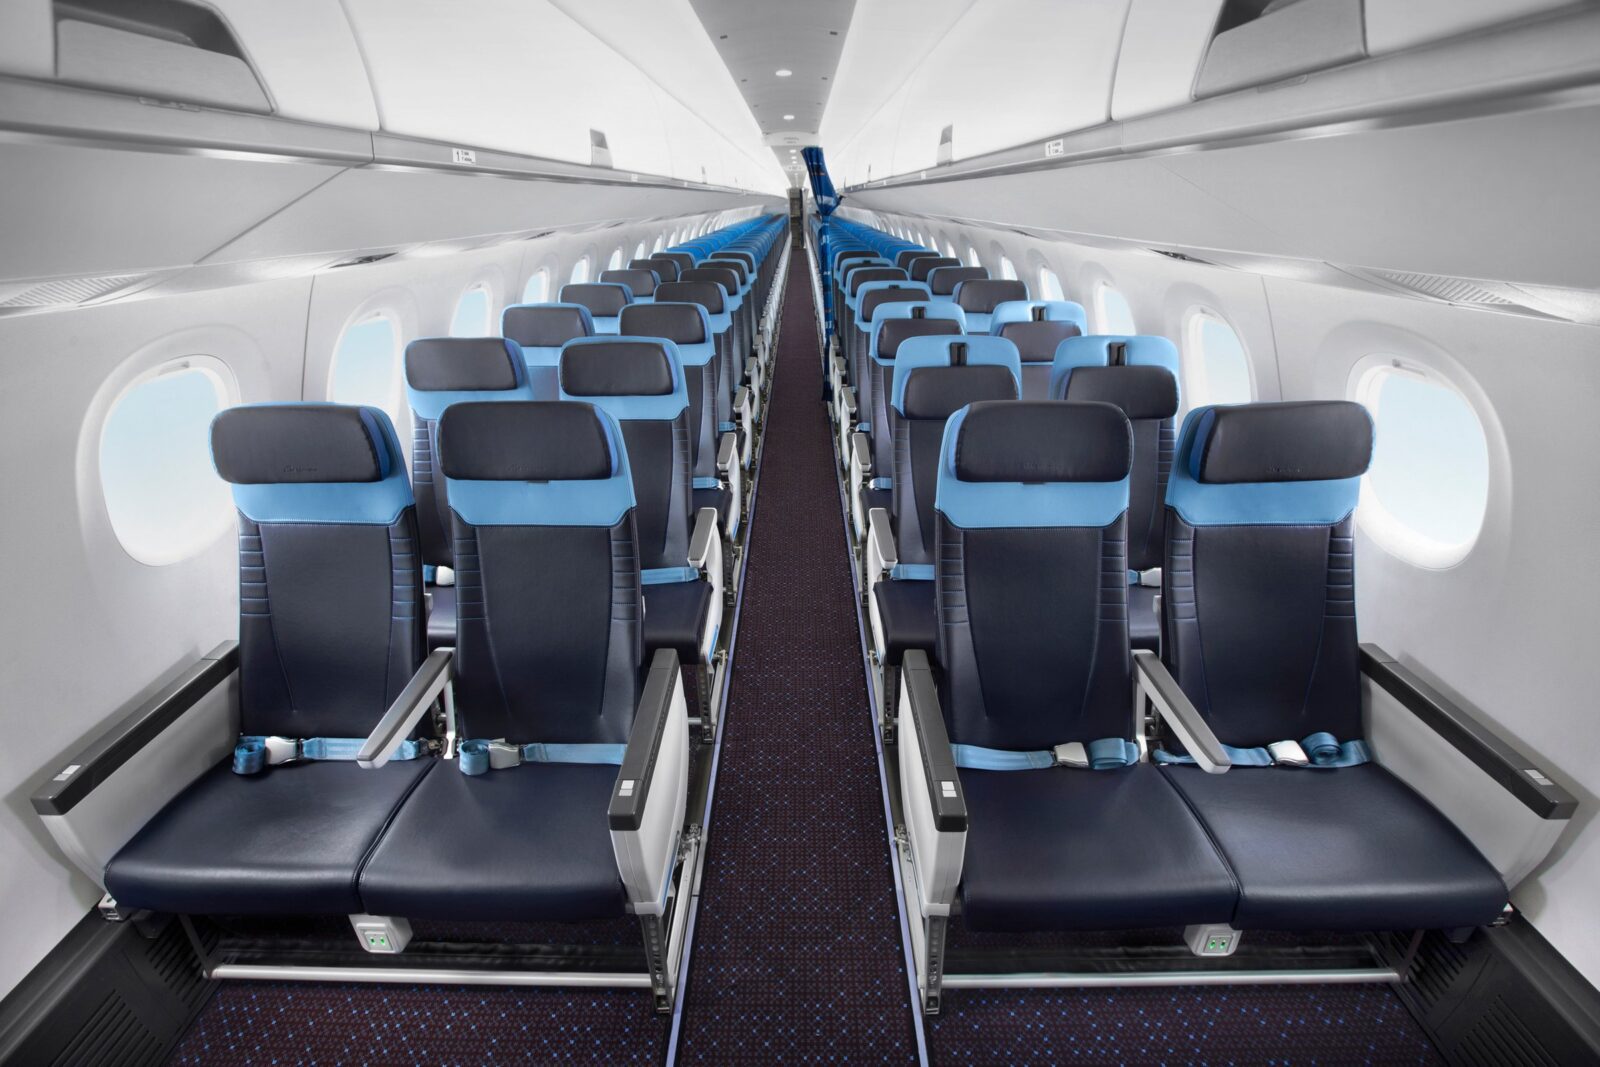 Recaro Aircraft Seating and Embraer To Develop Seats For E1 And E2 Aircraft